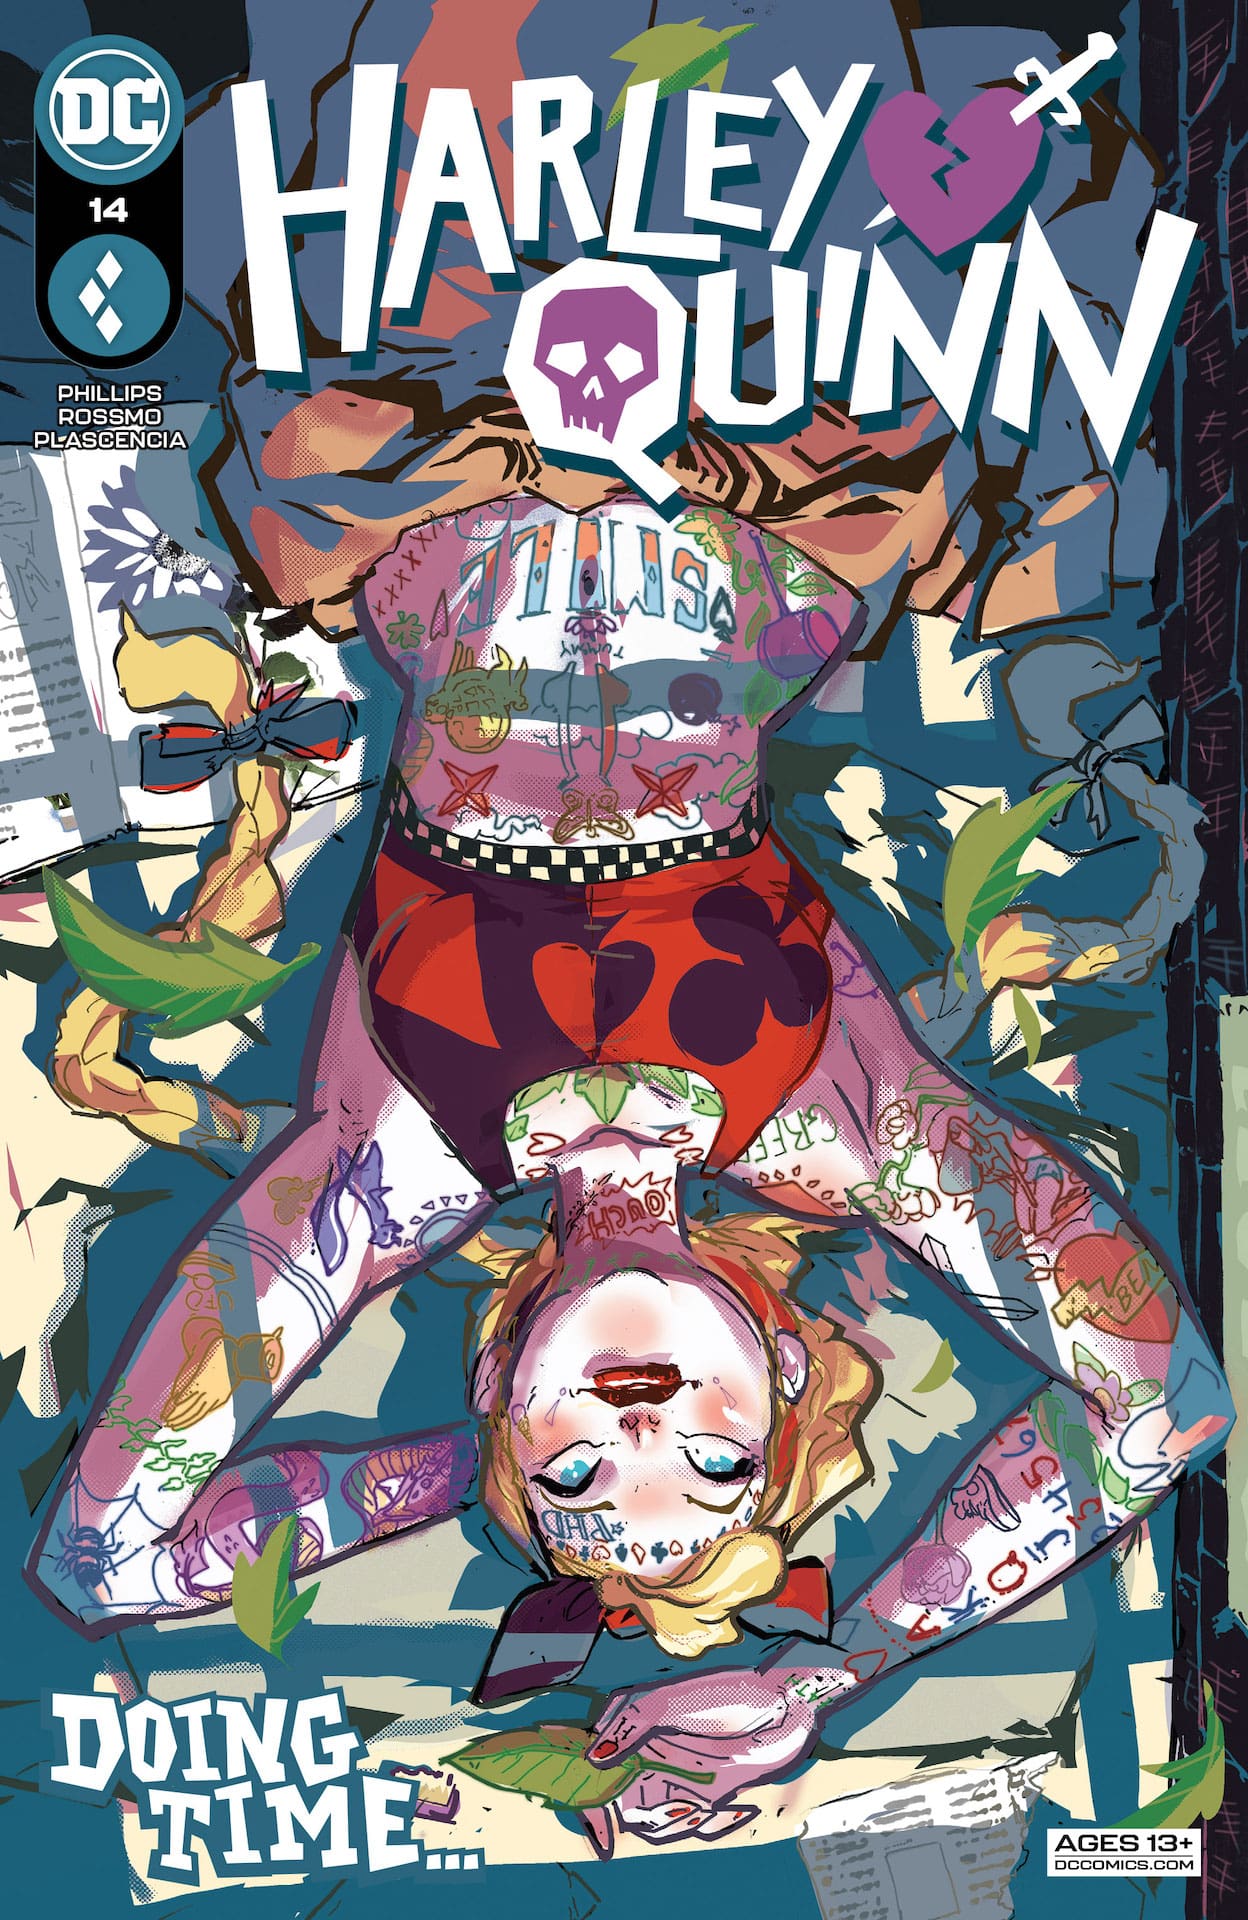 DC Preview: Harley Quinn #14